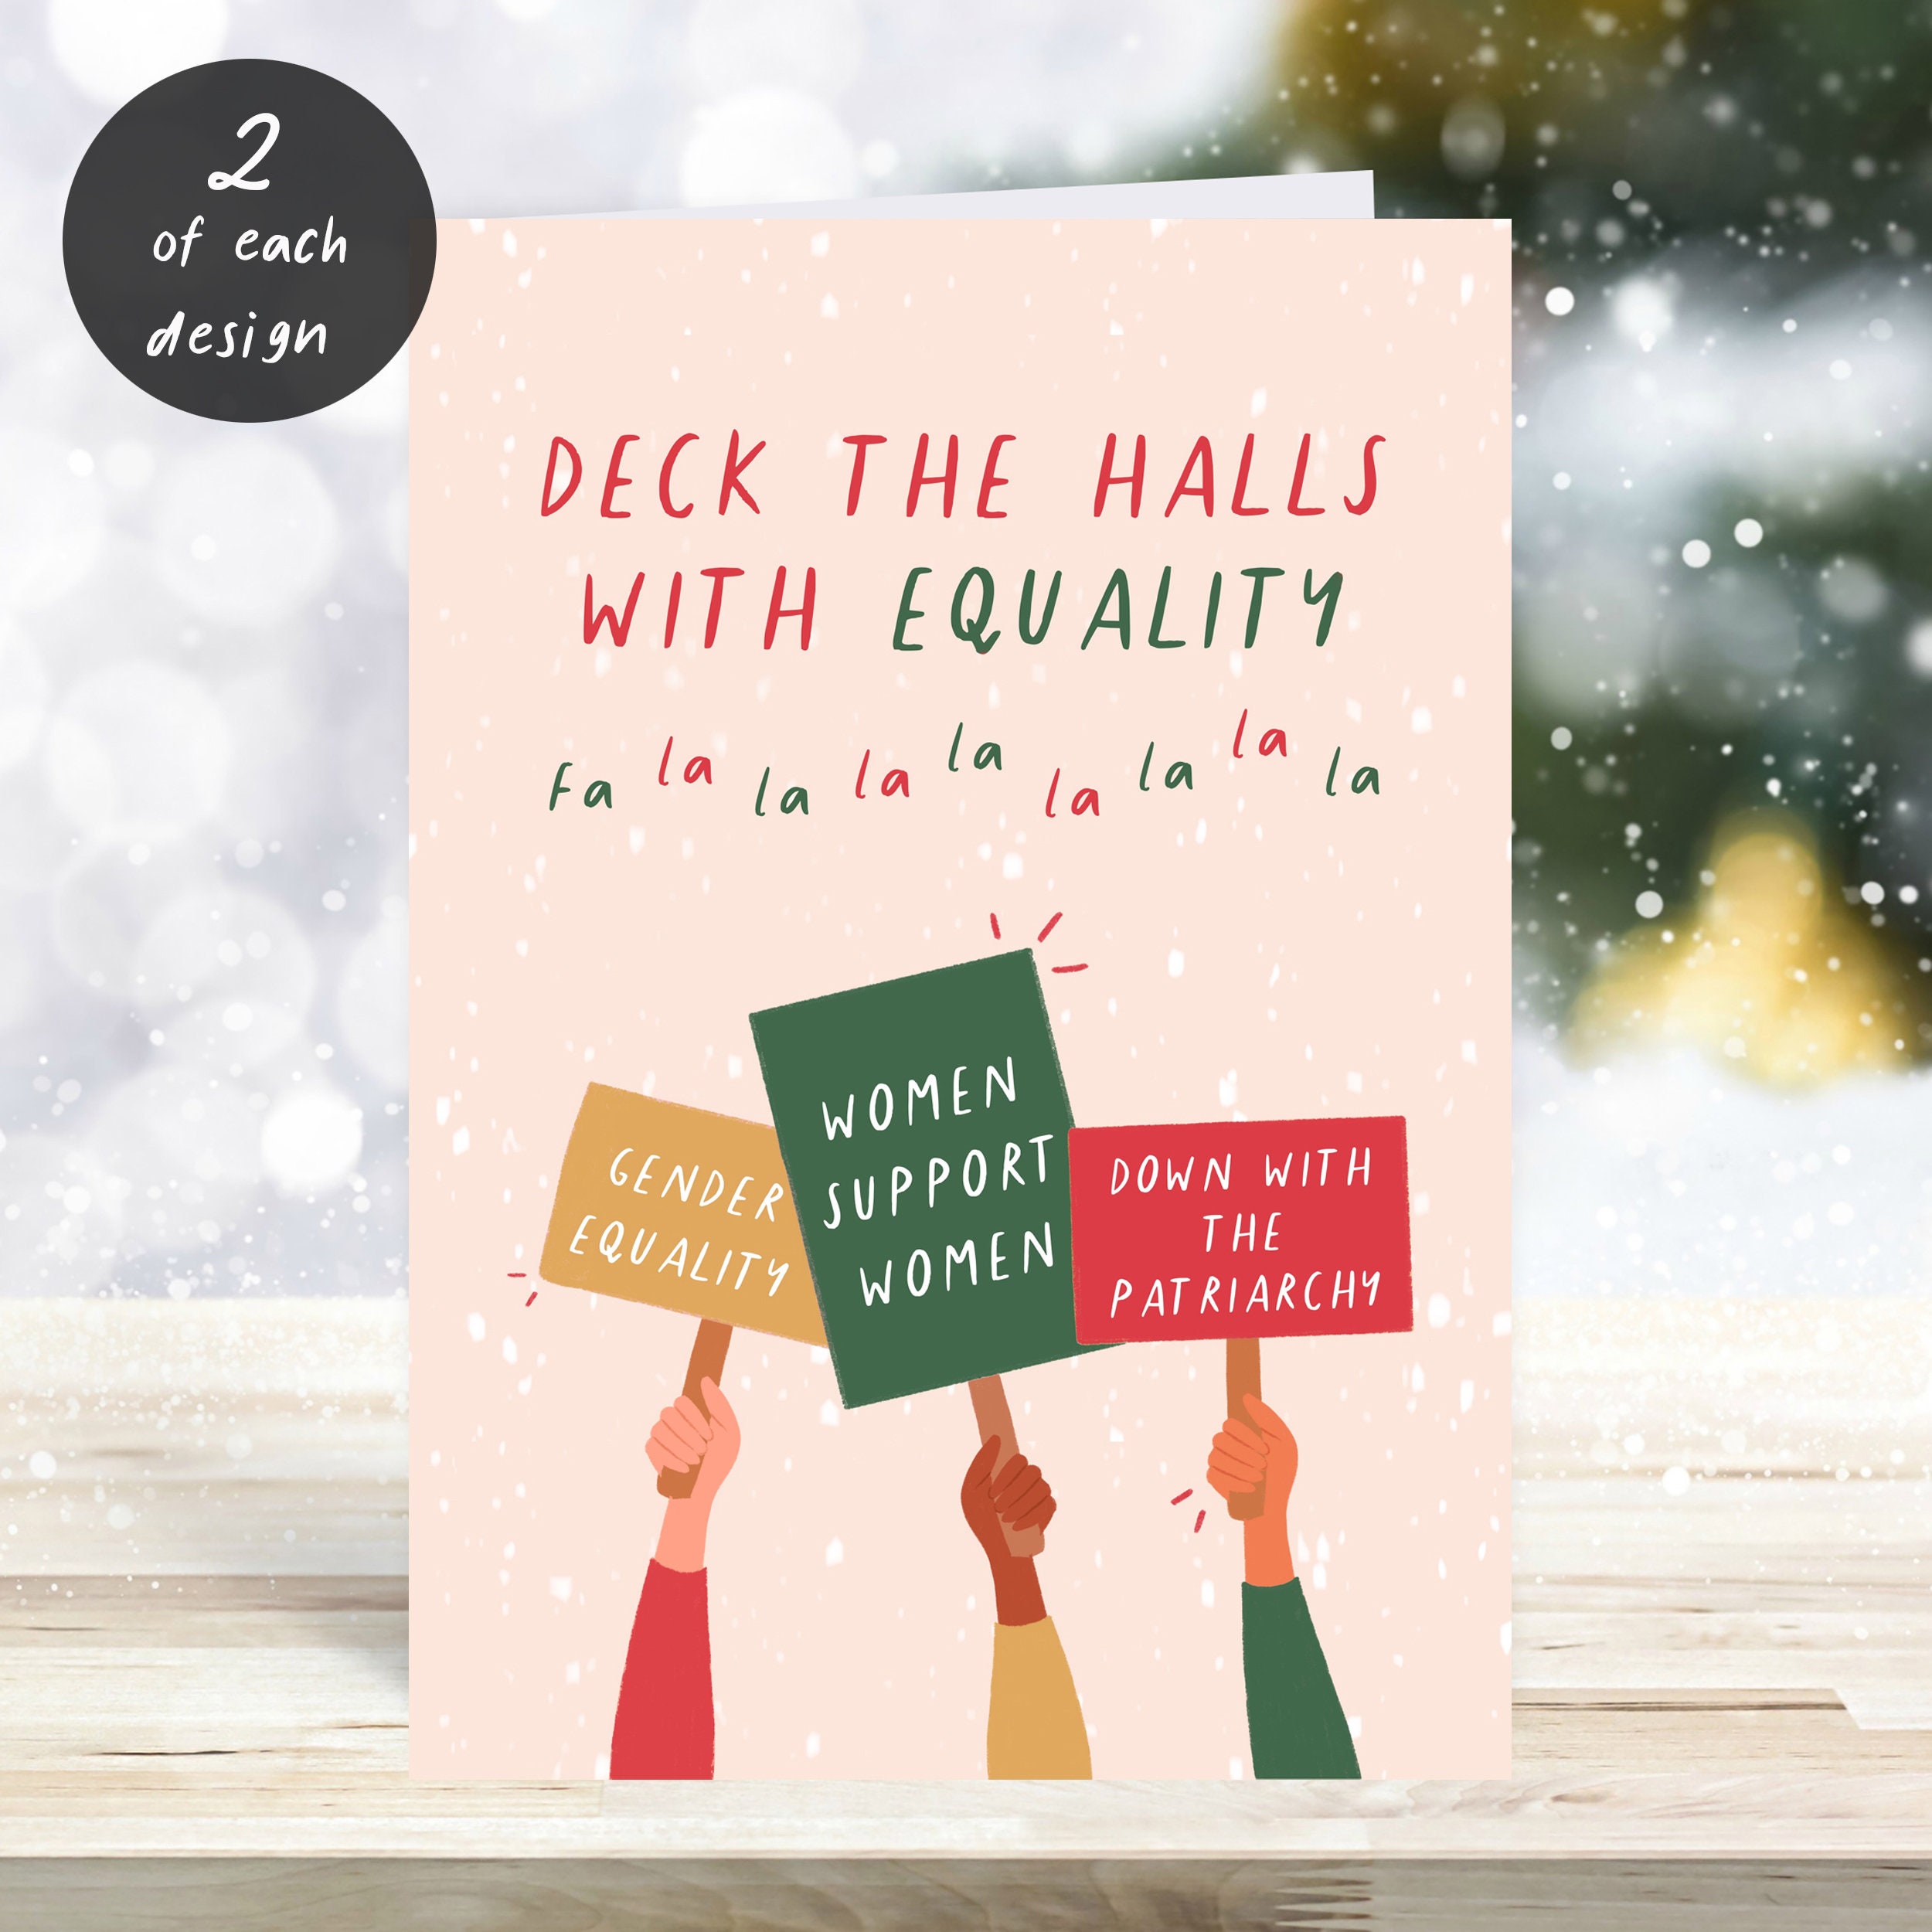 Feminist Christmas Card: All I Want is Equality, Feminist Christmas,  Christmas Gifts Under 5 Dollars, Funny Christmas Card, Feminist Gifts 